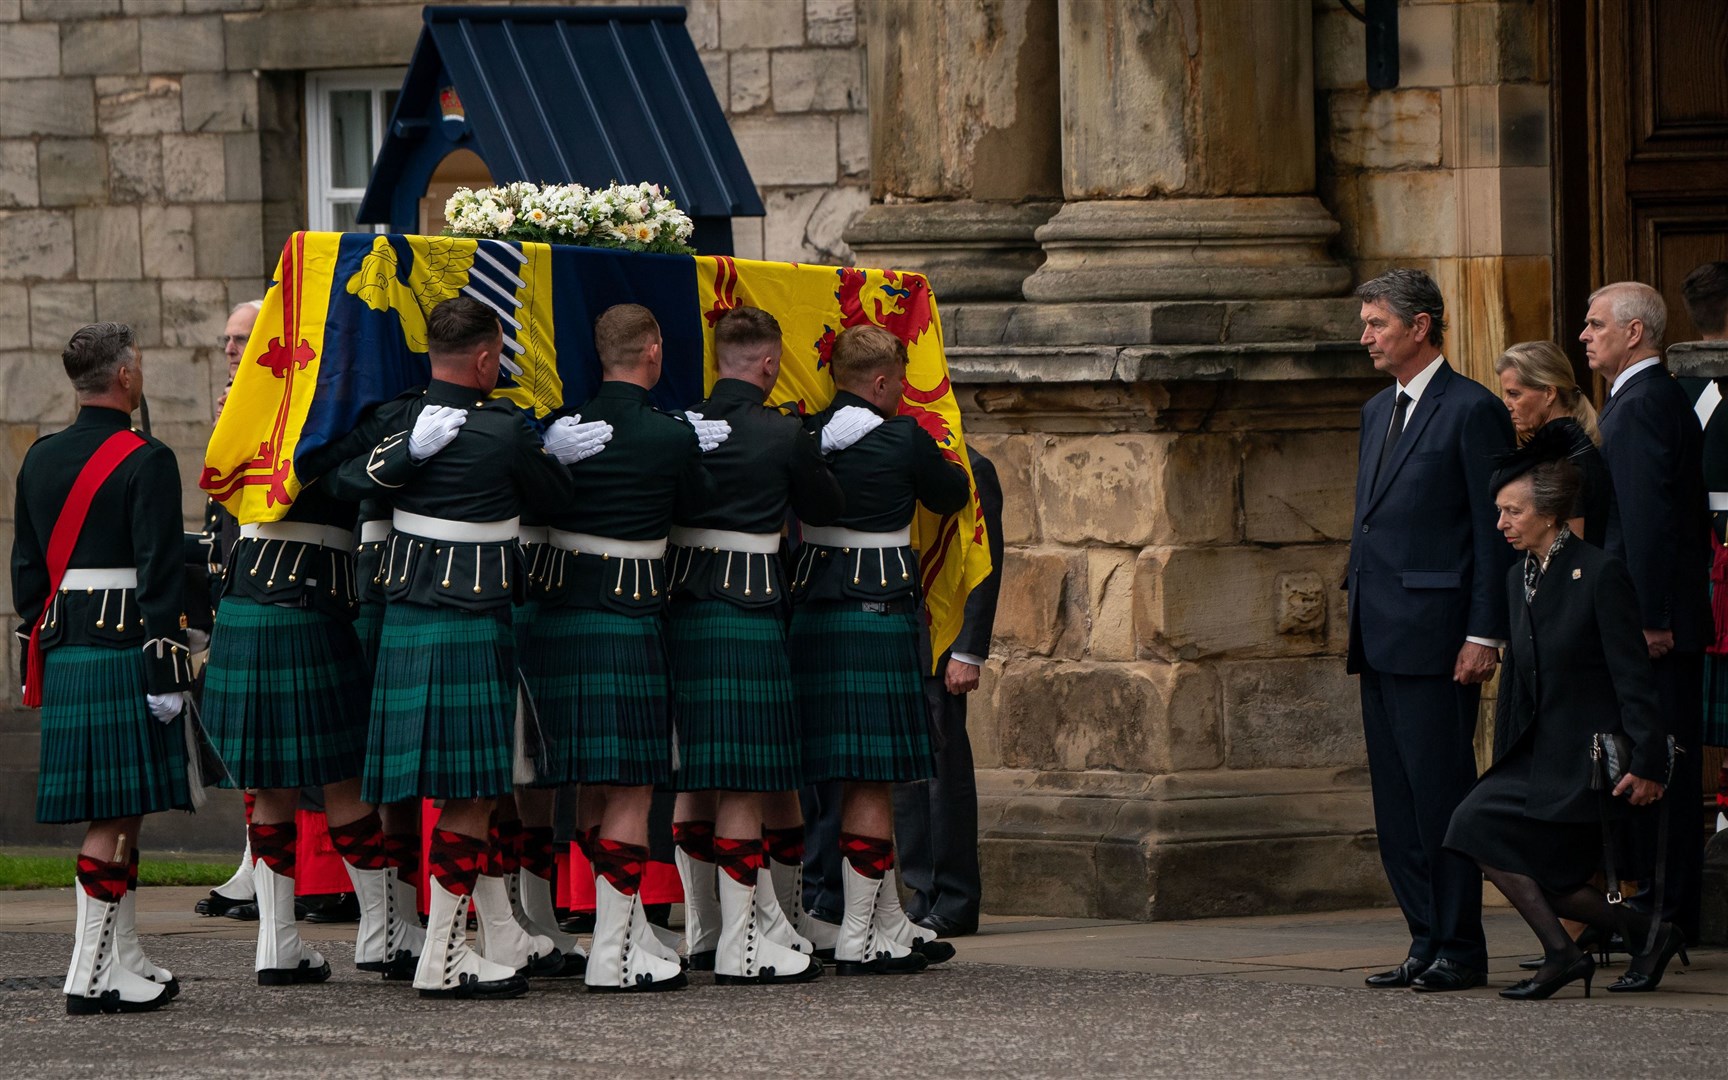 The Princess Royal curtseys as her mother’s coffin is carried into the palace (Aaron Chown/PA)